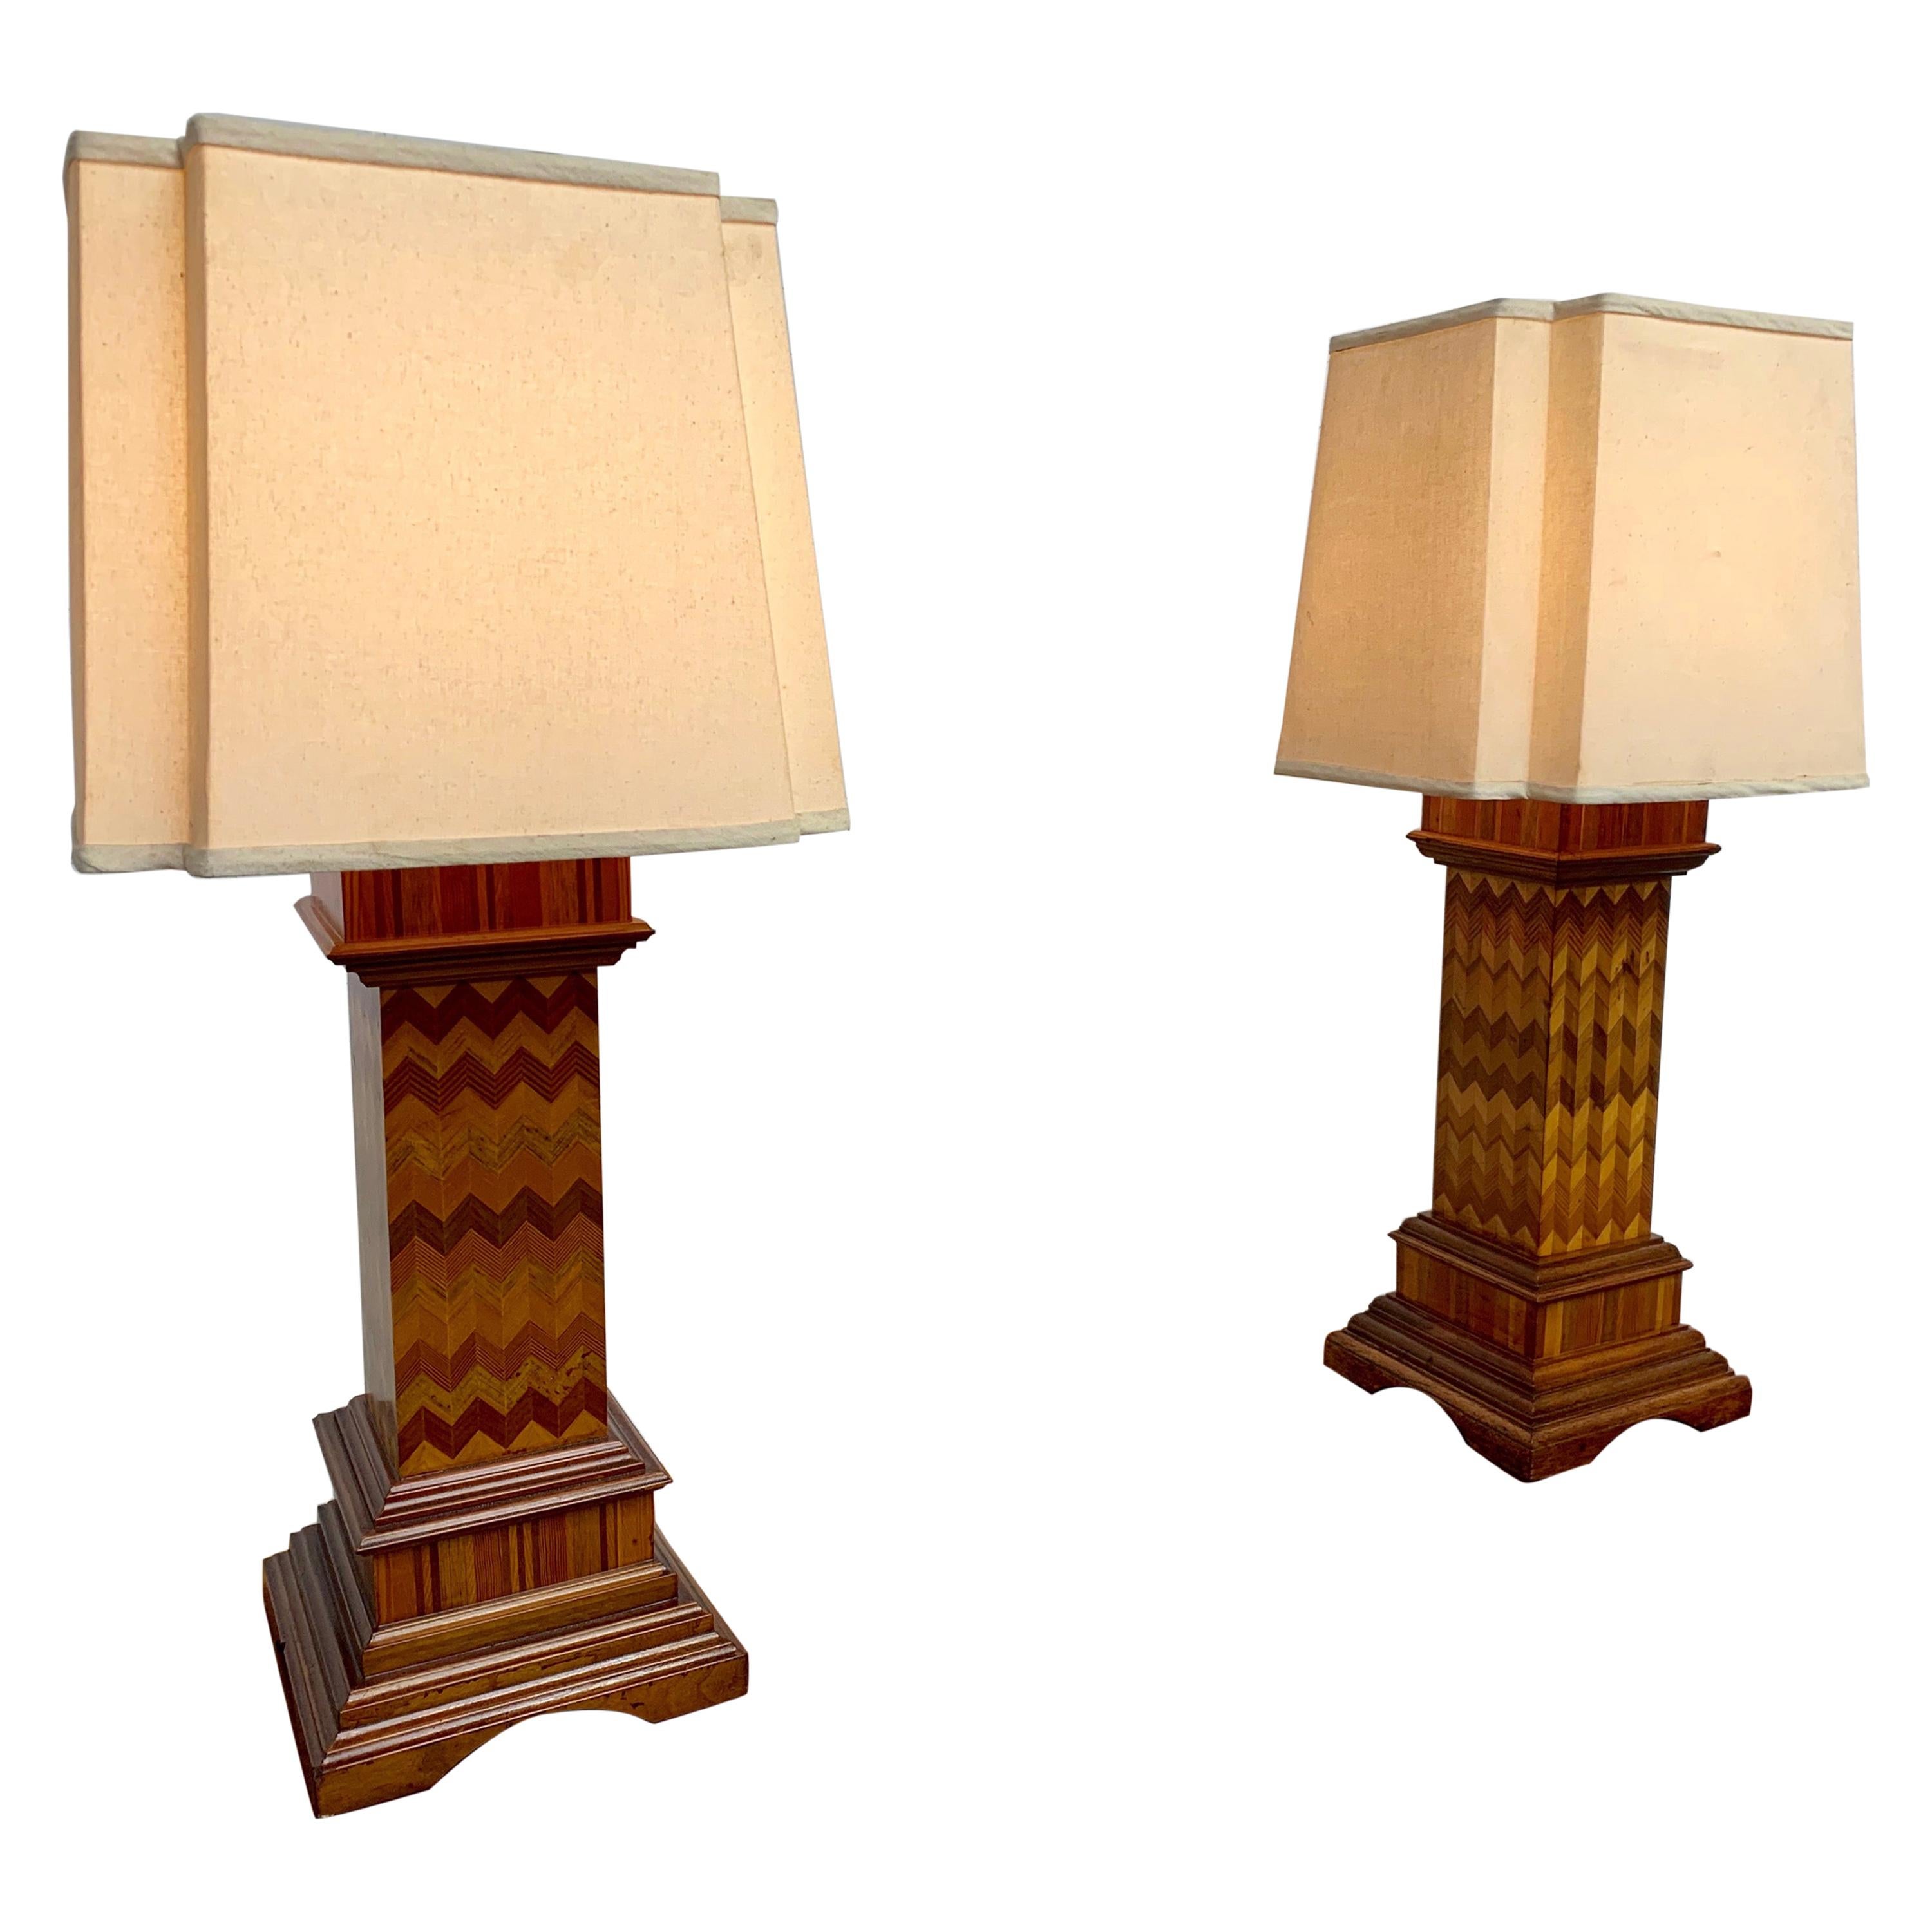 Antique Wood Lamps Made of Architectural Elements